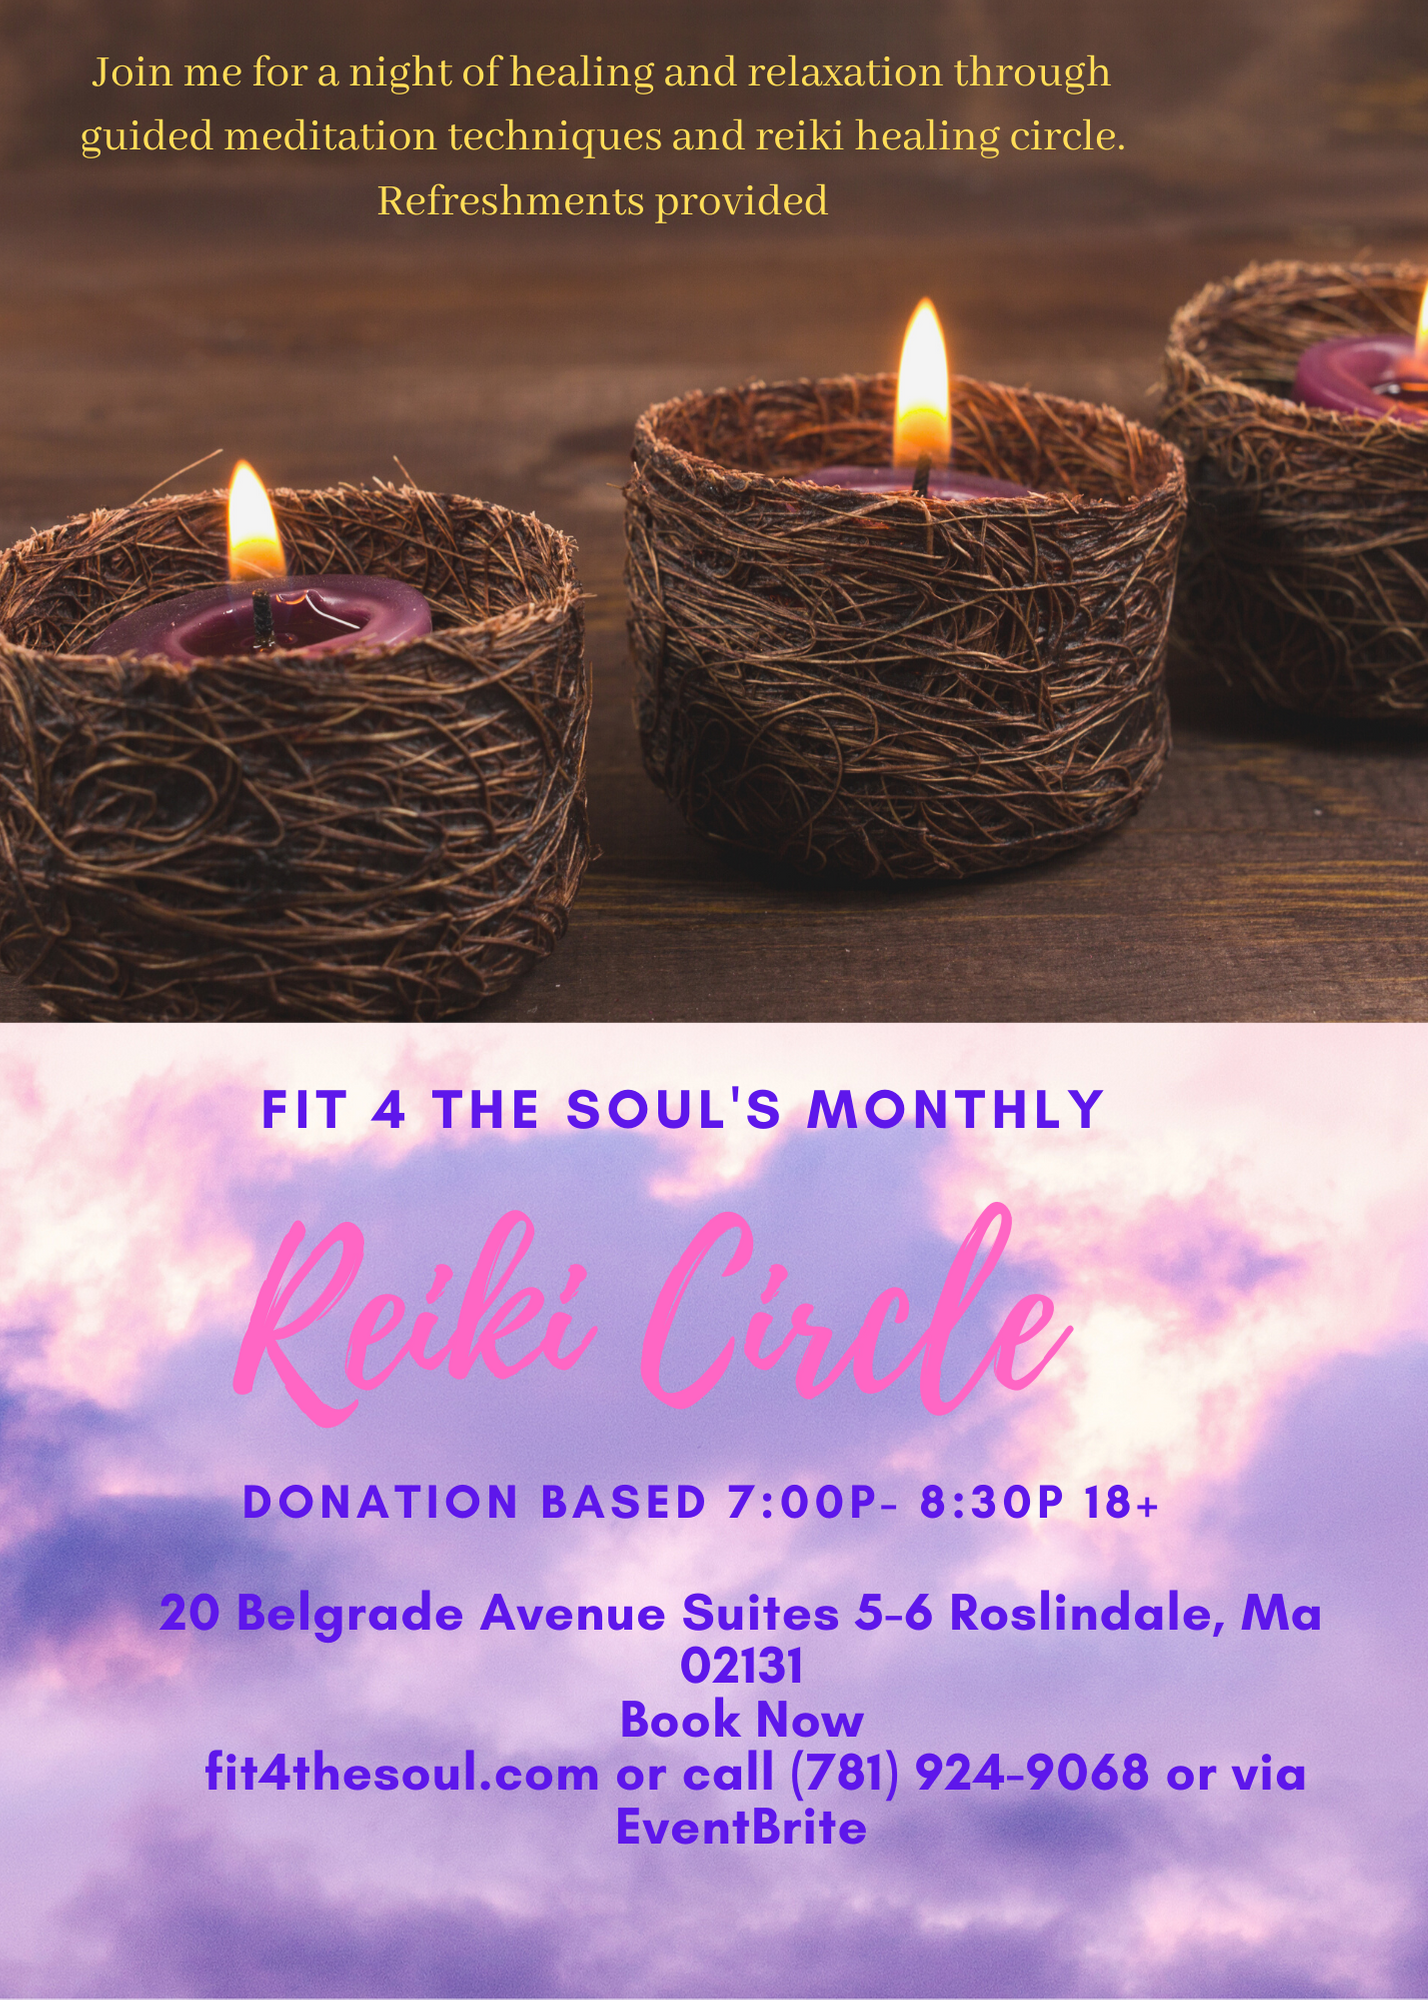 Fit 4 The Soul's Monthly Reiki Circle